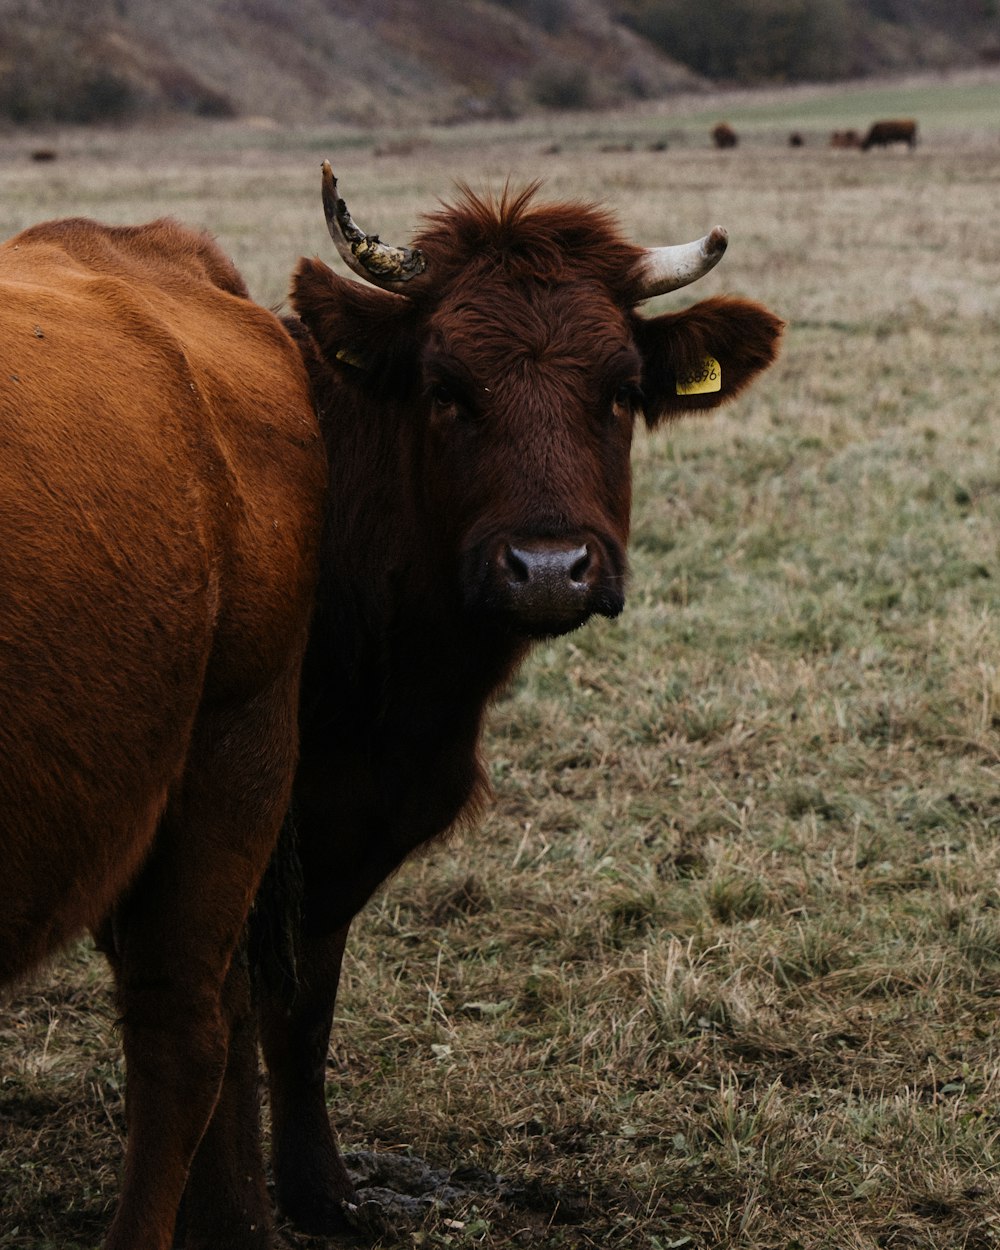 a brown cow standing on top of a dry grass field